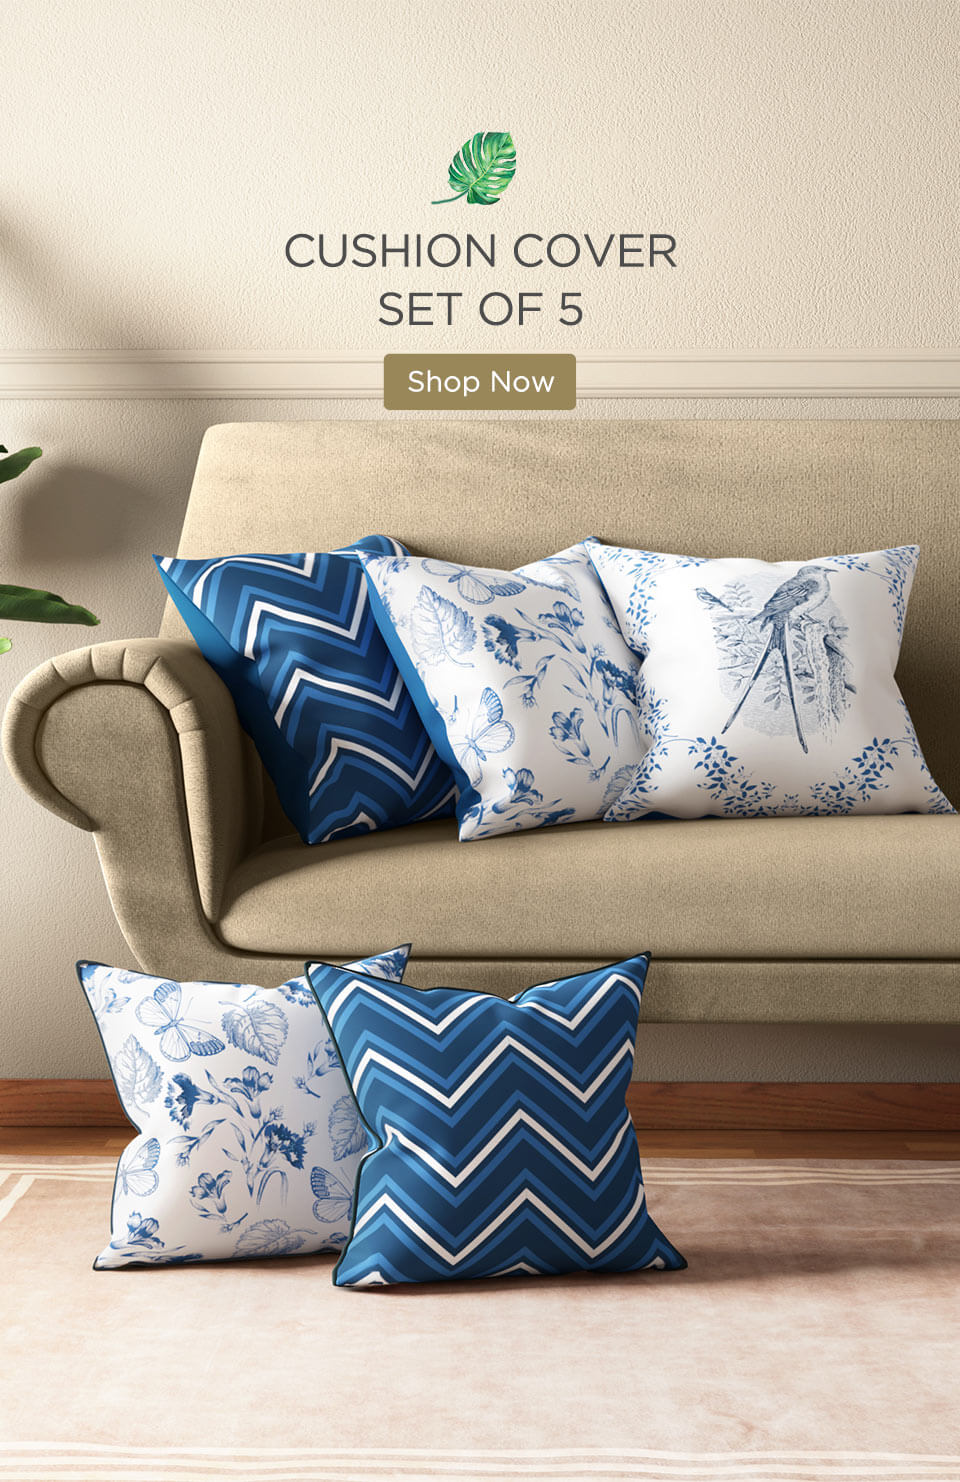 Buy Cushion Covers Set of 5 Online